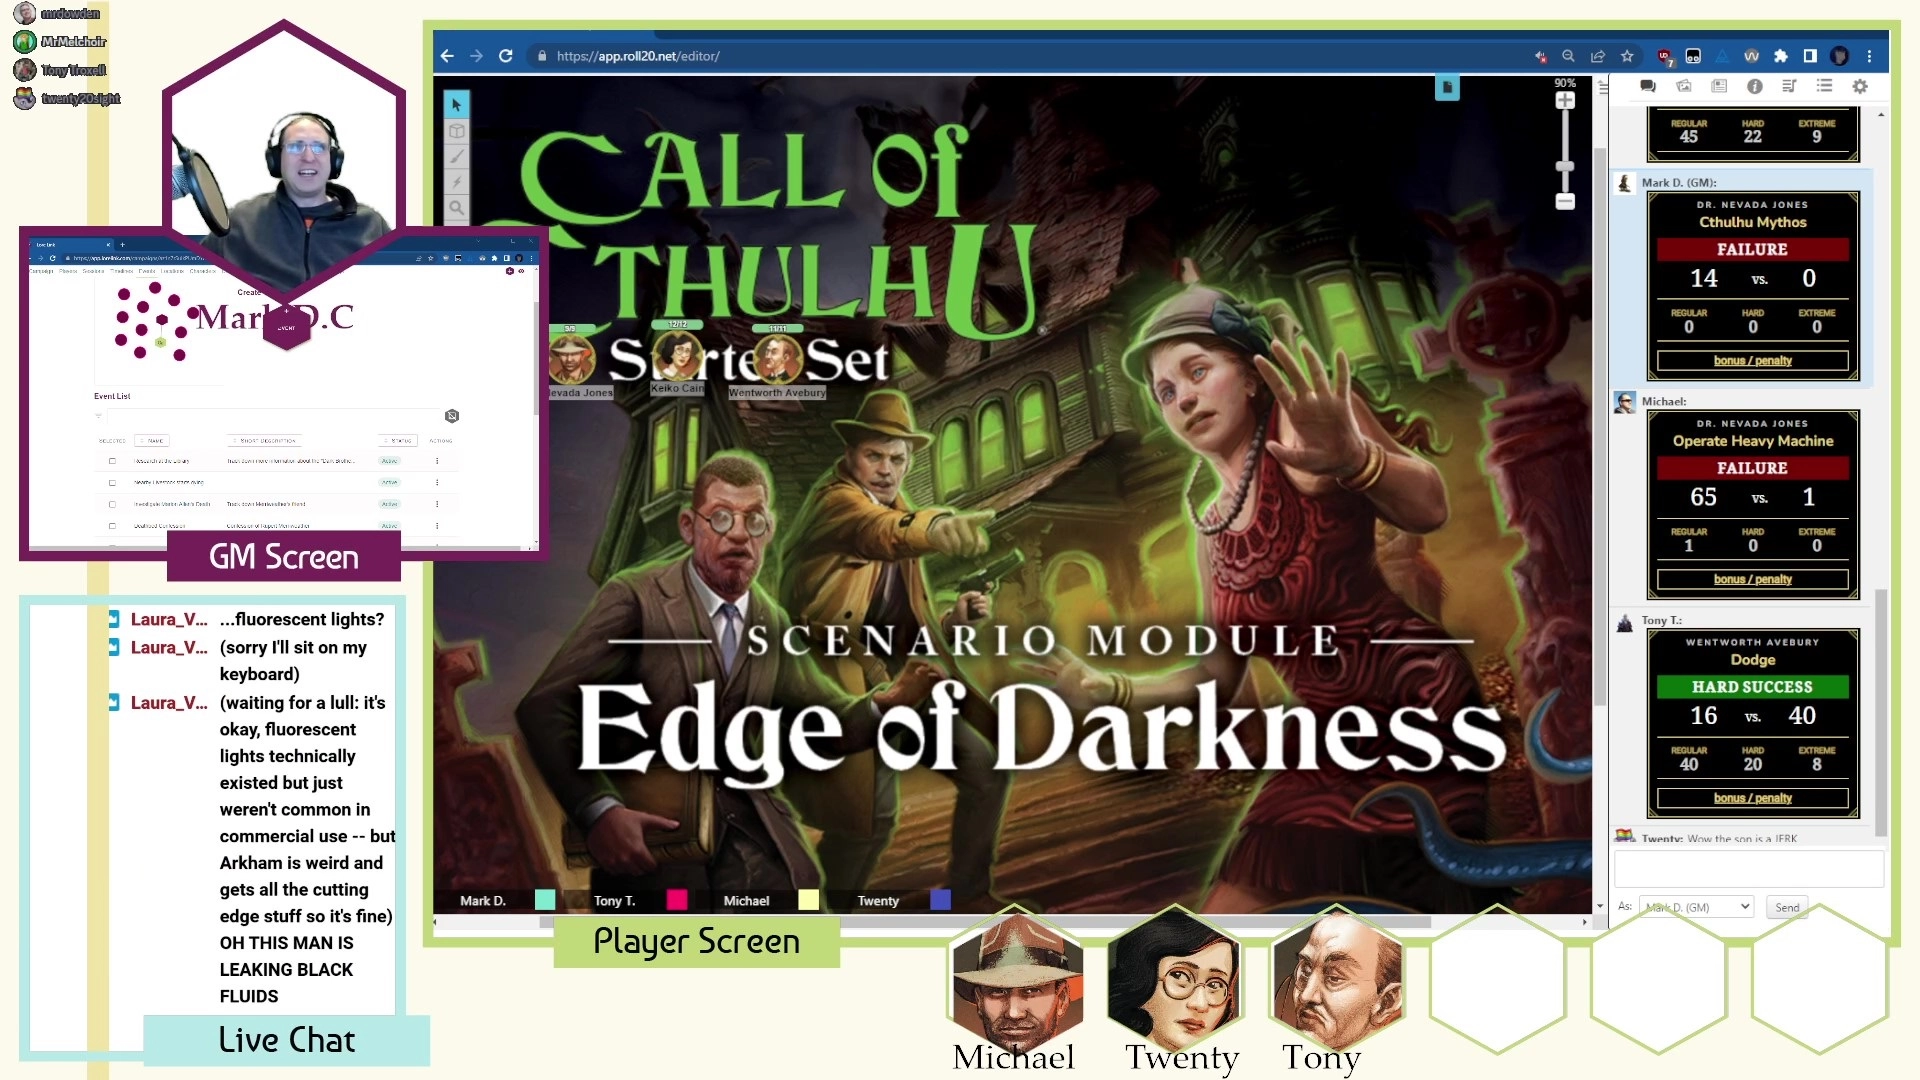 Mark GMs a game of Call of Cthulhu in Roll 20, with Mike, Twenty, and Tony. The game being run is Edge of Darkness in Roll20.